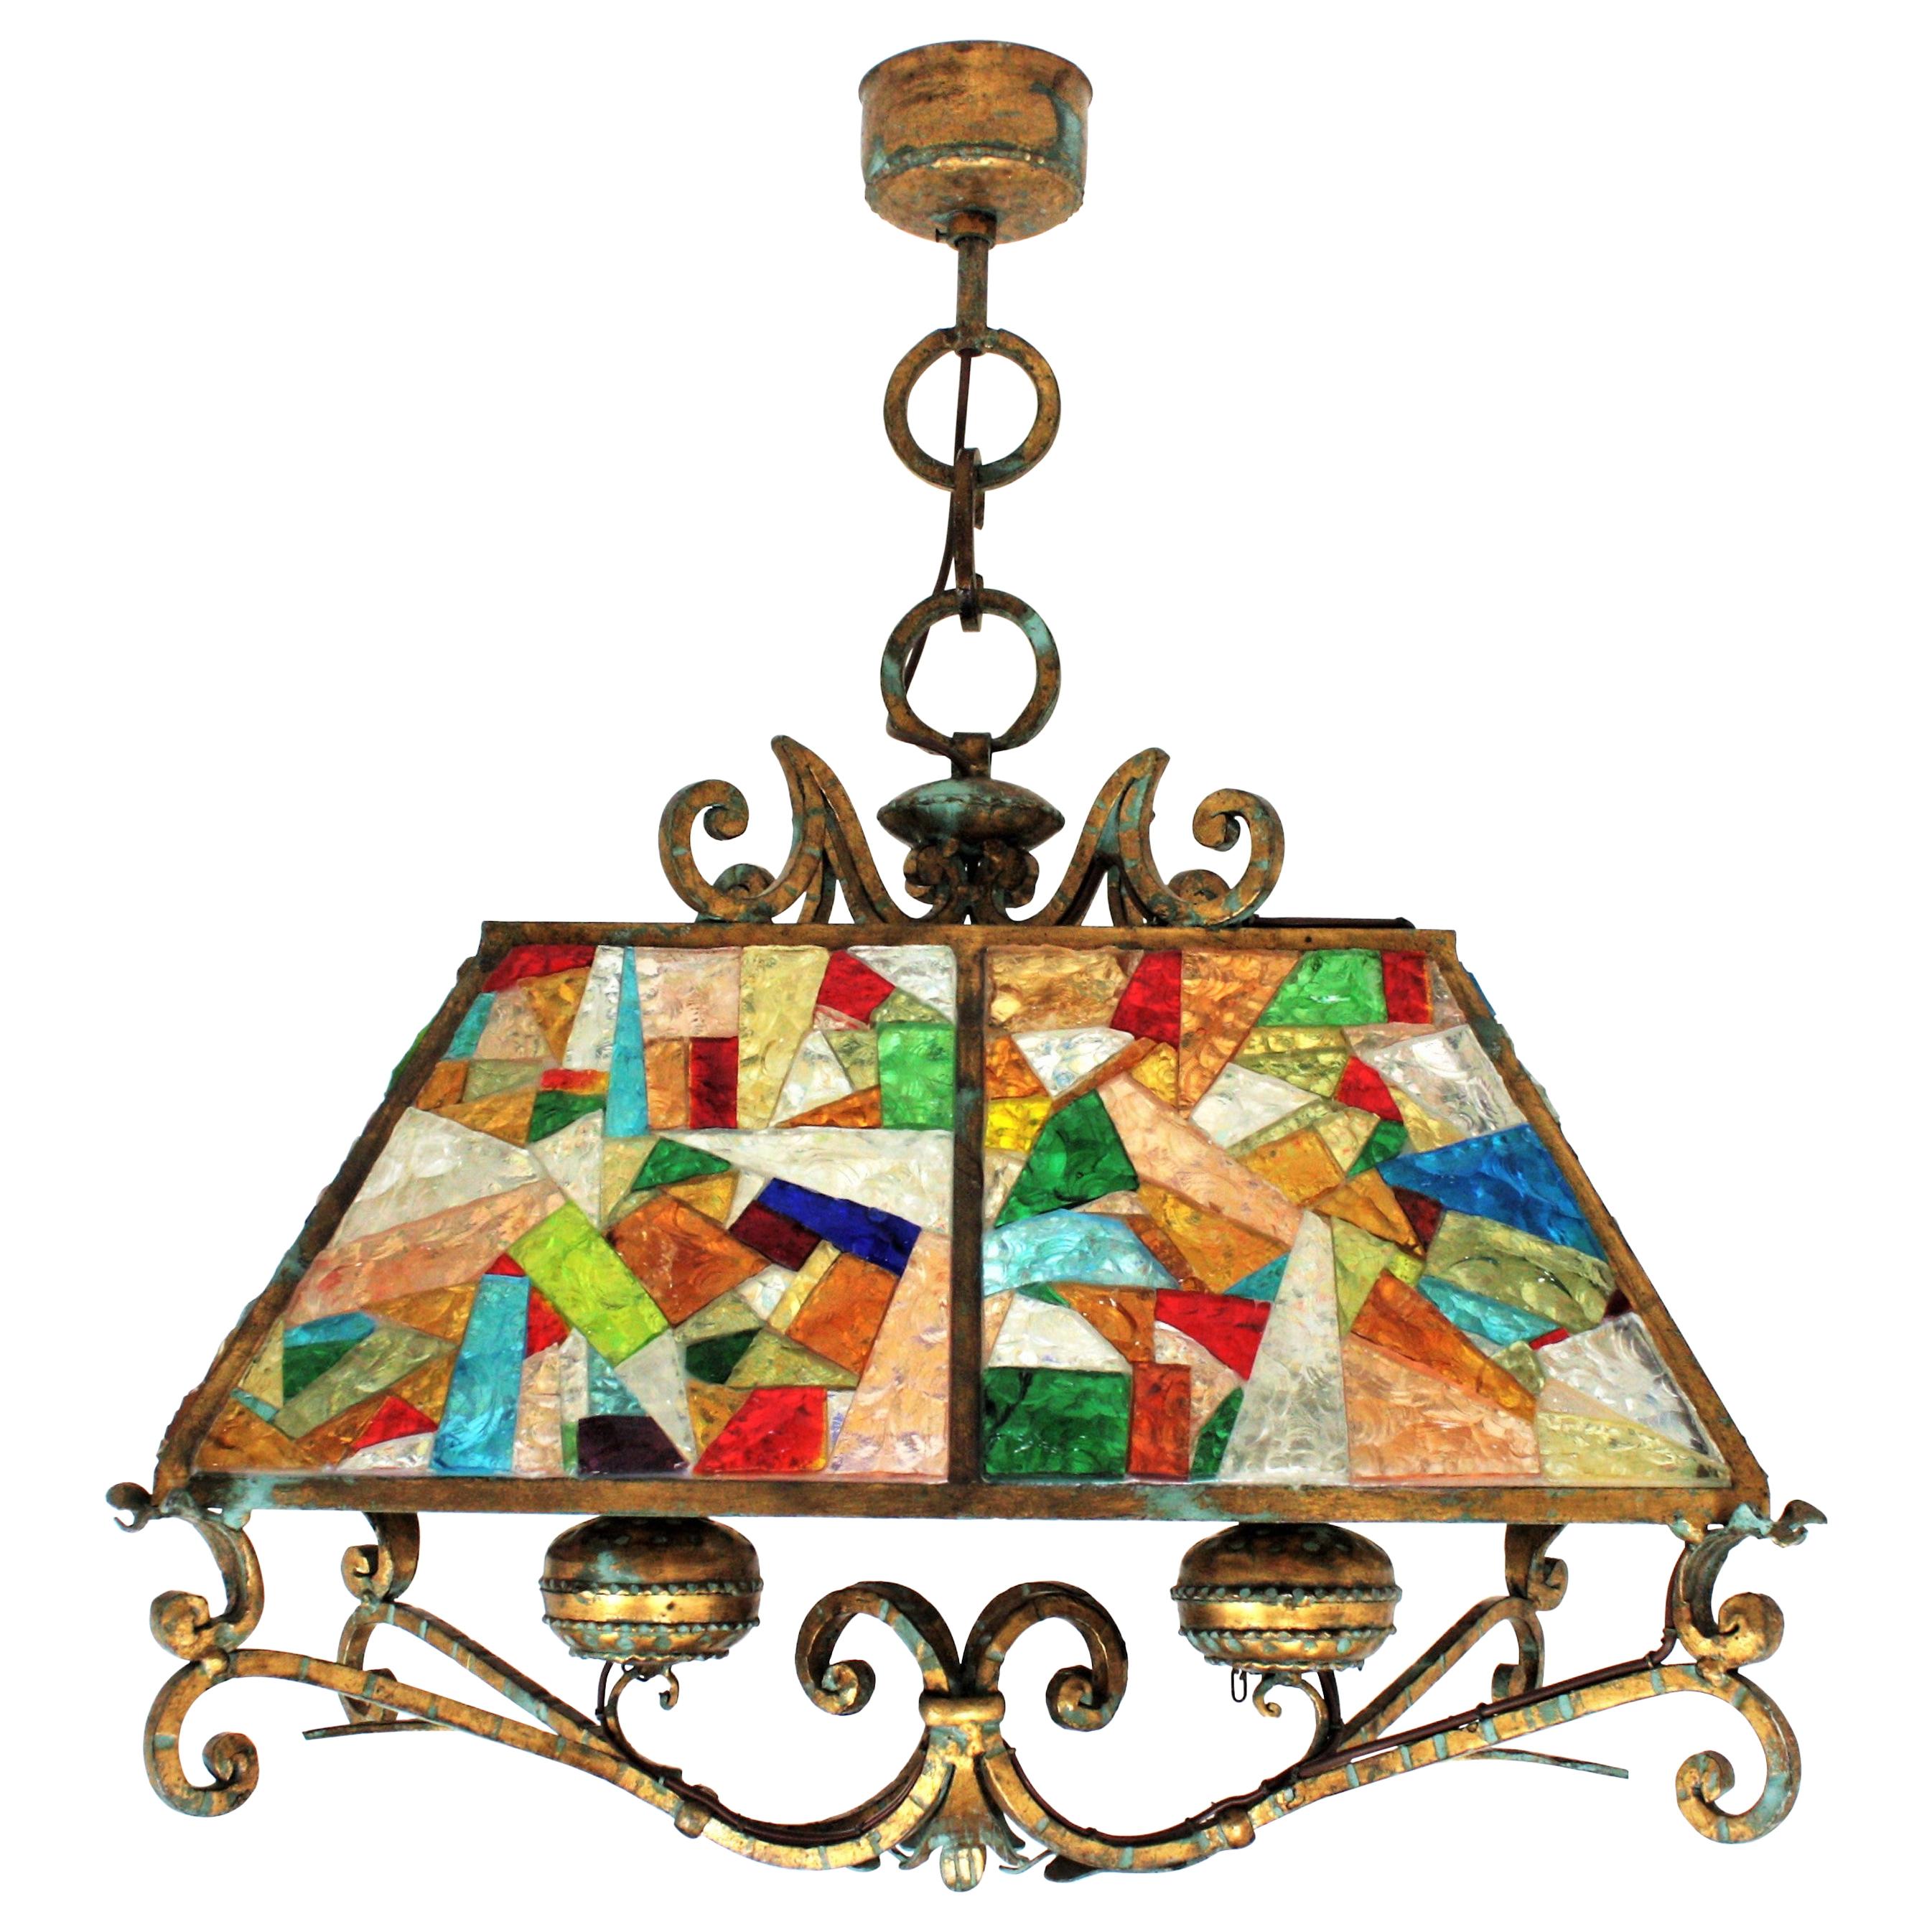 Poliarte Longobard Chandelier in Wrought Iron with Multi-Color Glasses